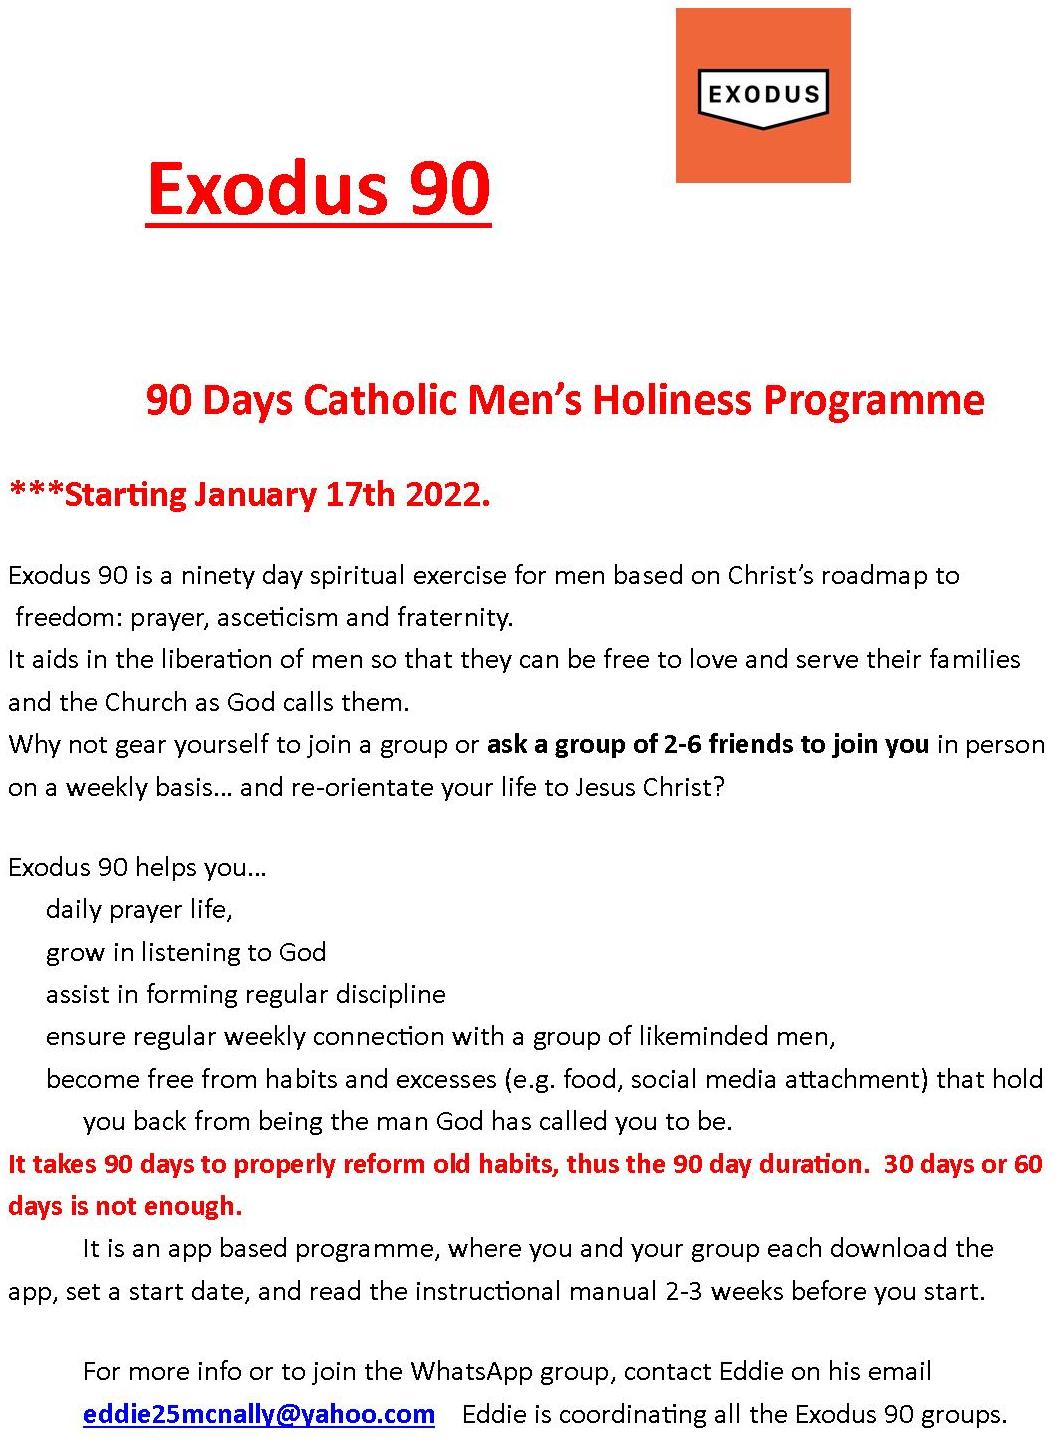 Exodus 90 flier - Please click to see larger version